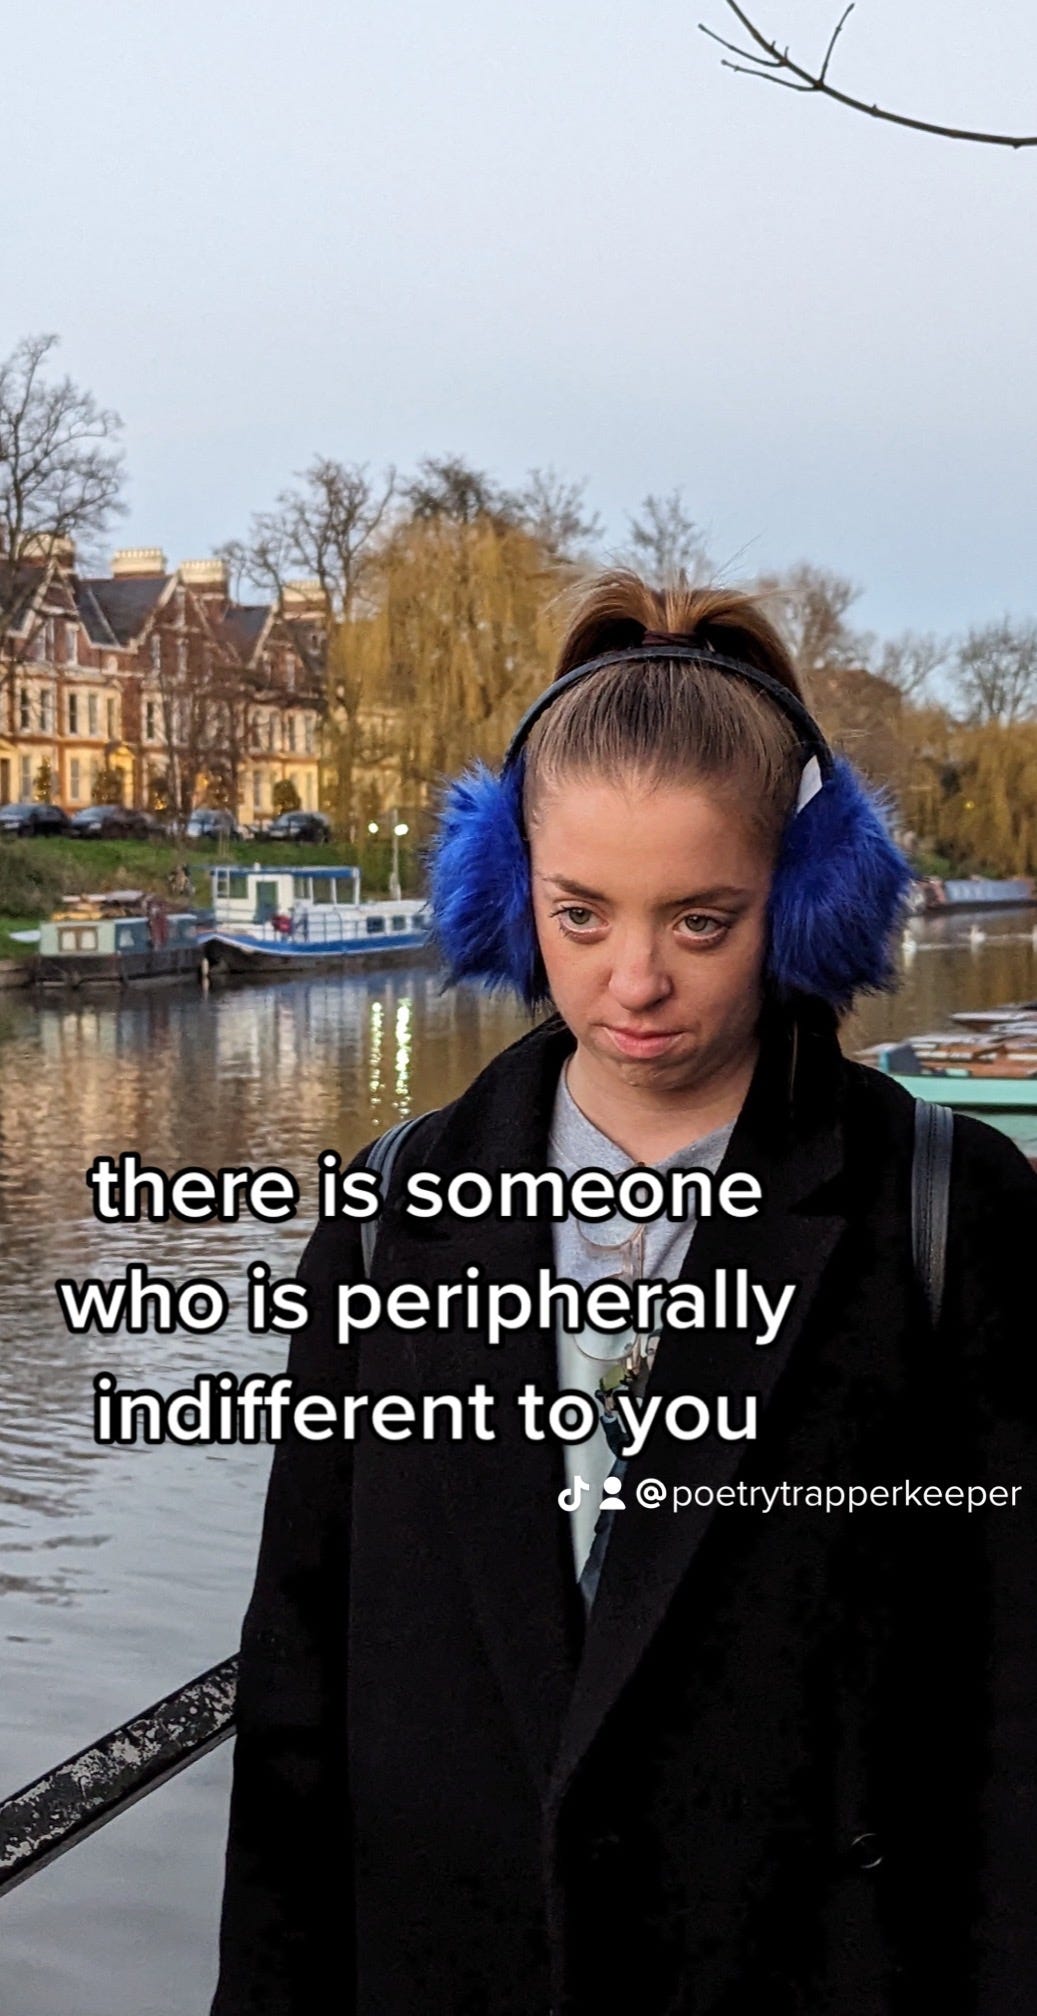 there is someone who is peripherally indifferent to you